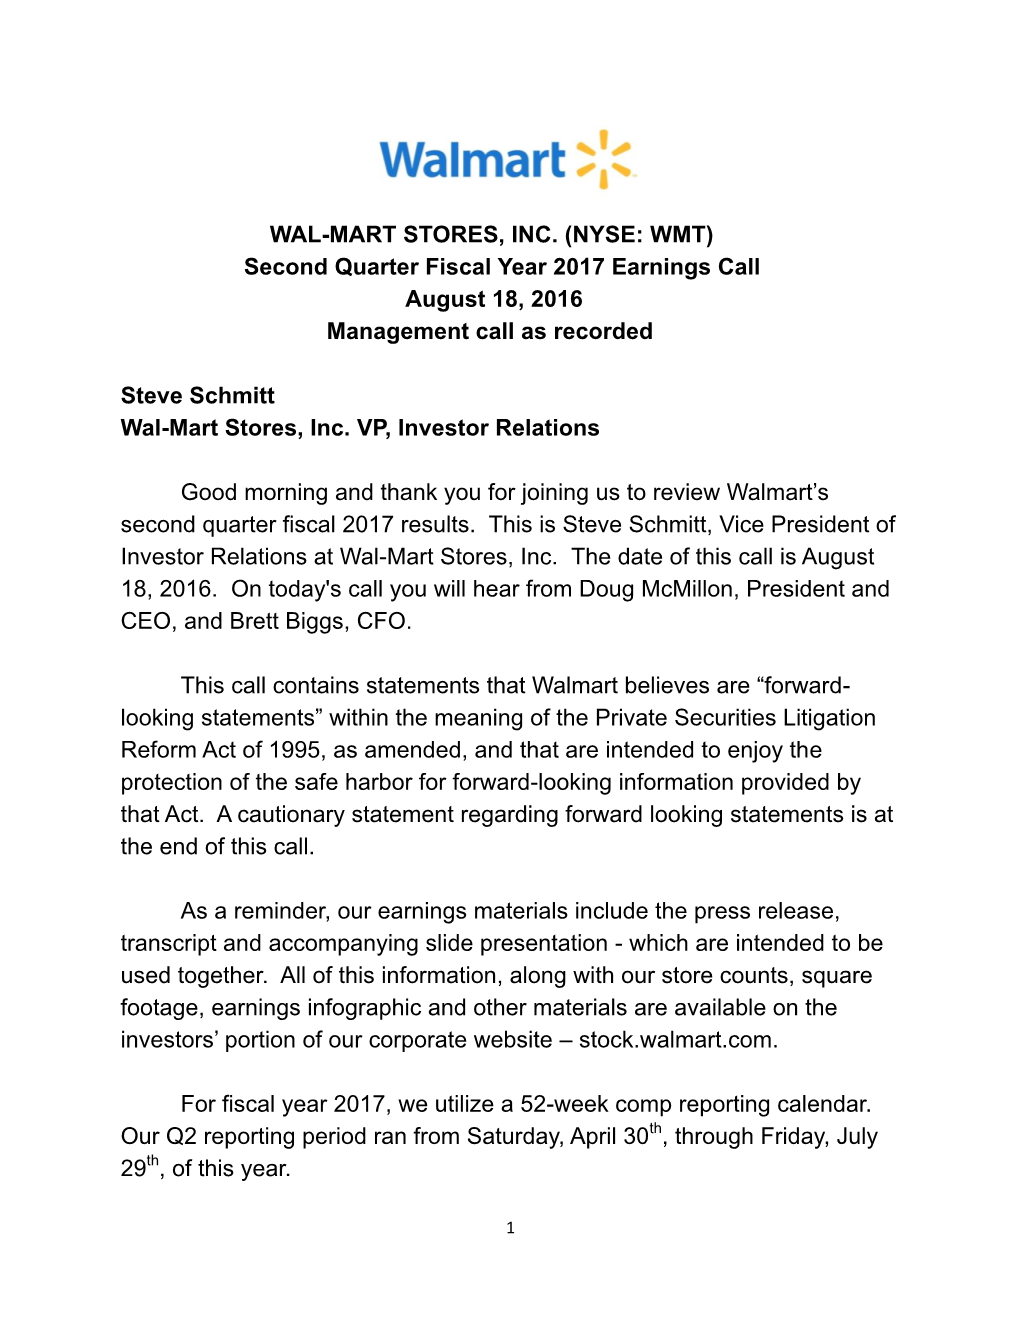 WAL-MART STORES, INC. (NYSE: WMT) Second Quarter Fiscal Year 2017 Earnings Call August 18, 2016 Management Call As Recorded Stev